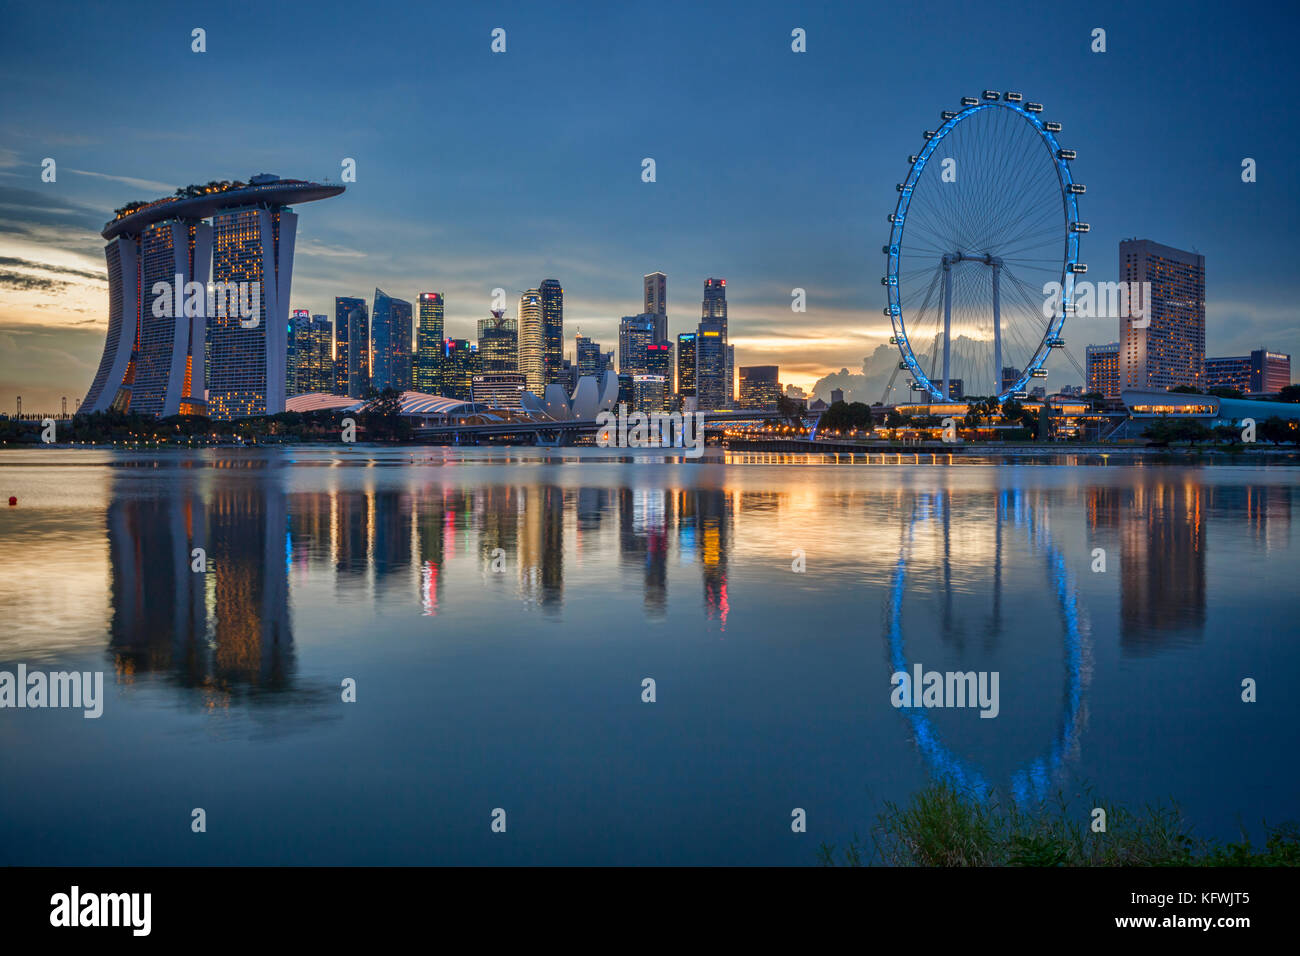 Singapore skyline with the Marina Bay Sands, the CBD and the Singapore Flyer, all reflected in Marina Bay and illuminated at twilight. Stock Photo